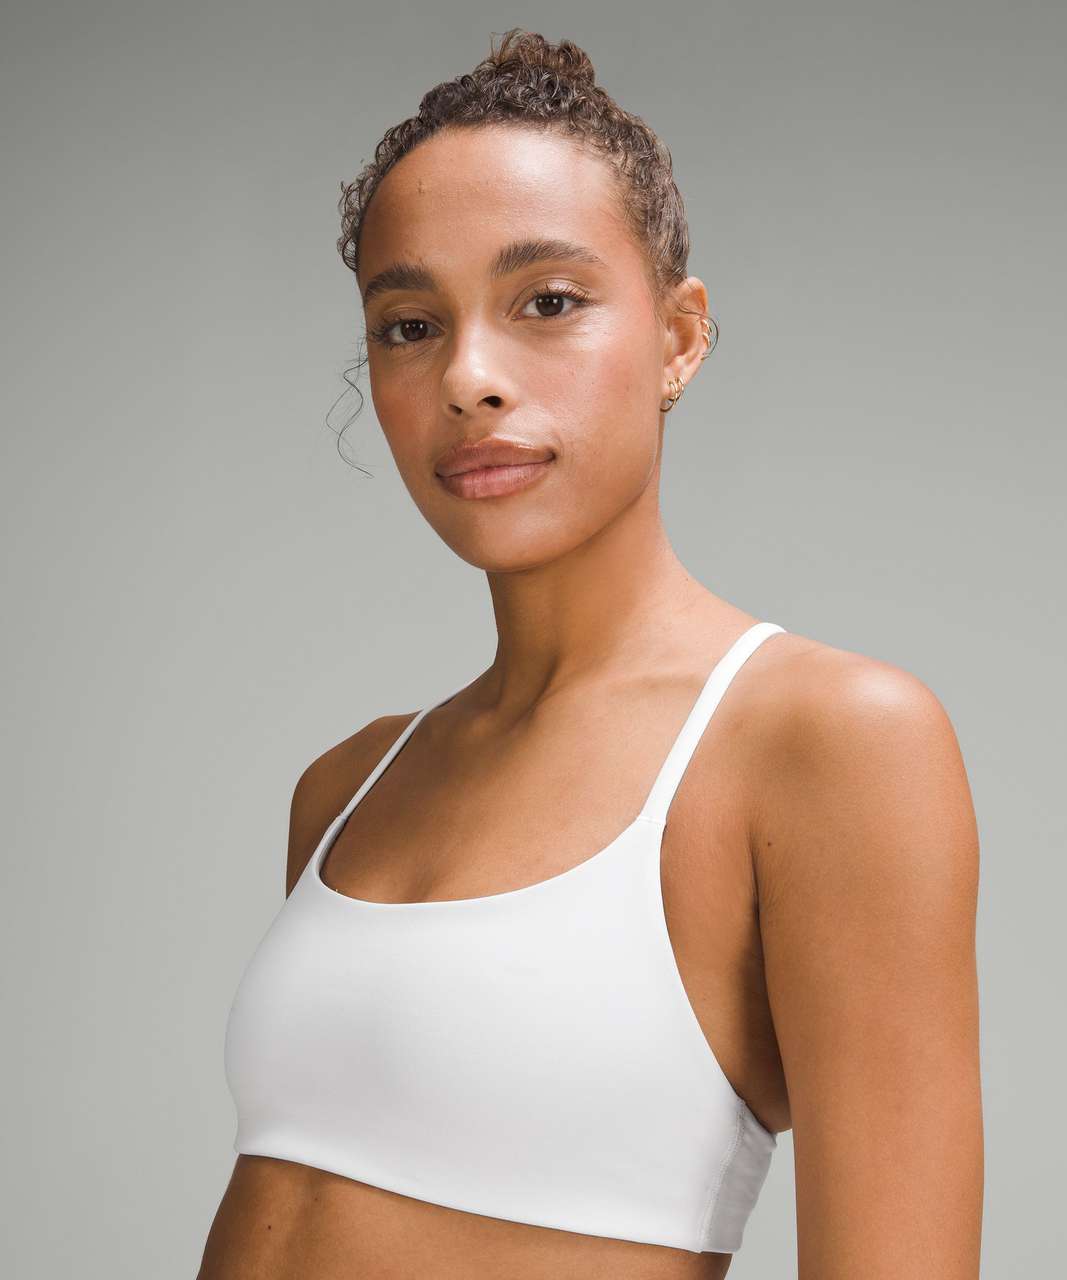 Lululemon Wunder Train Strappy Racer Bra Light Support, A/B Cup *Twill - White